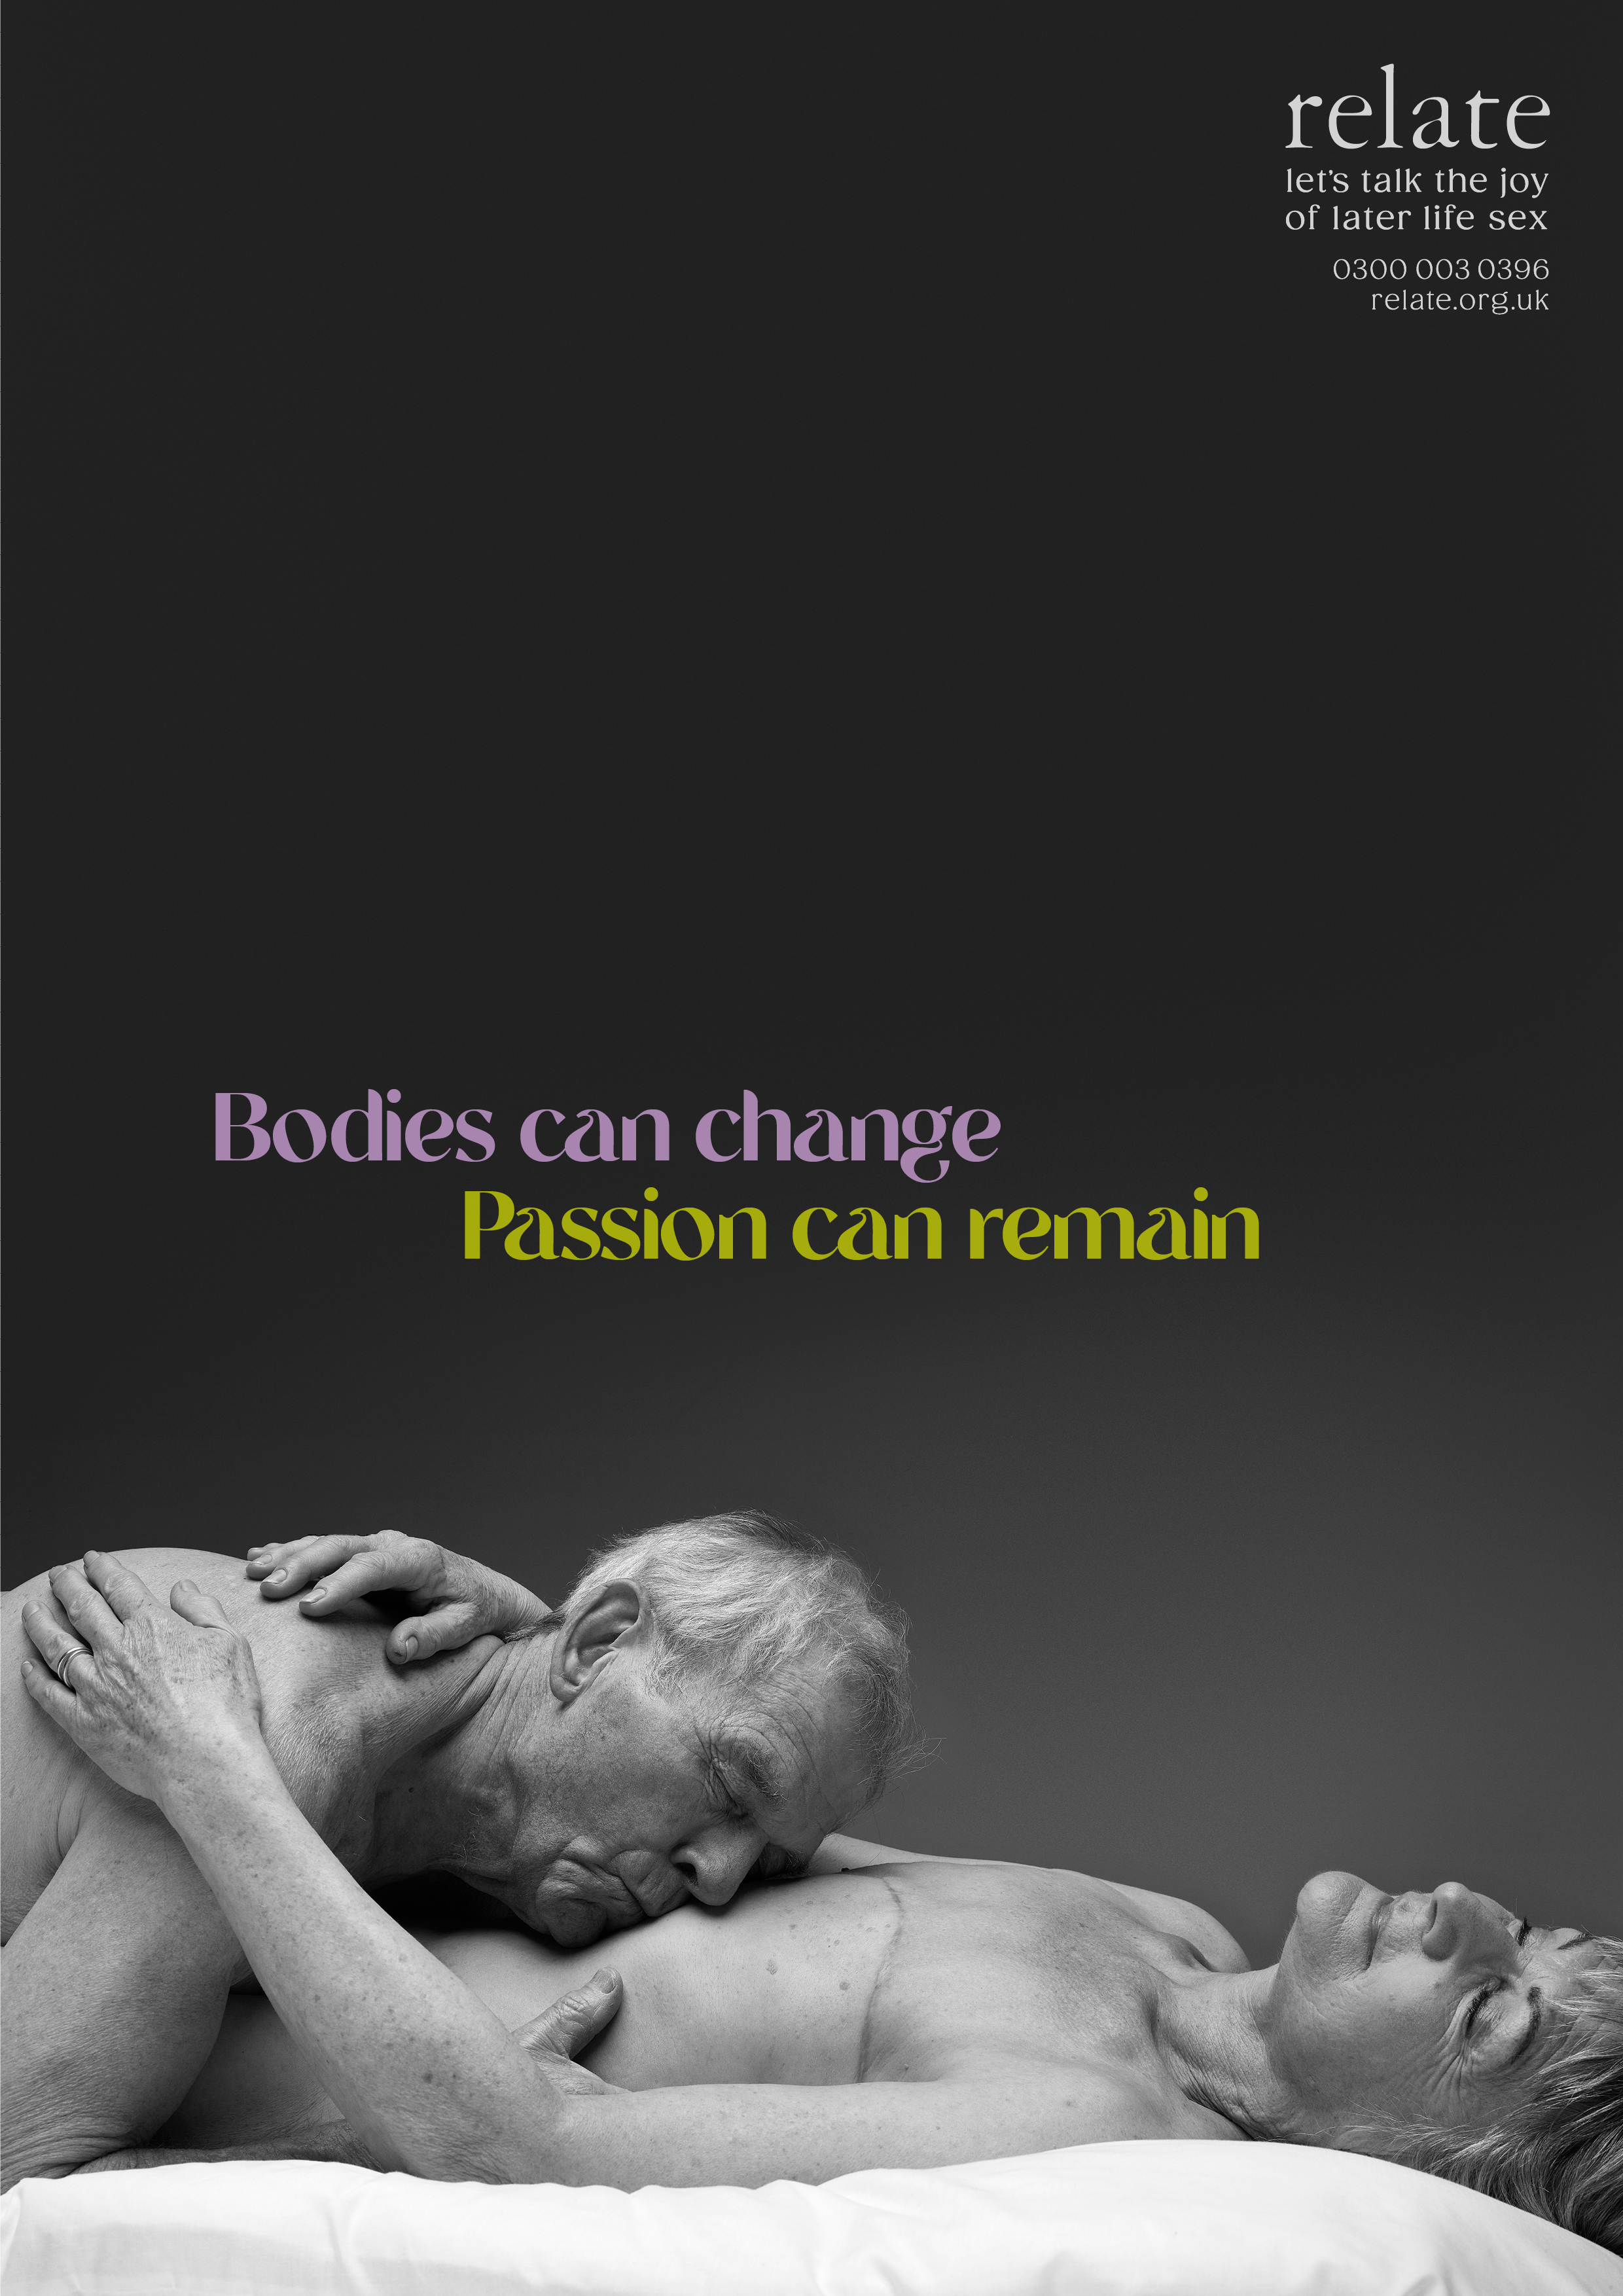 Older couple lying naked together with caption 'bodies can change. Passion can remain'